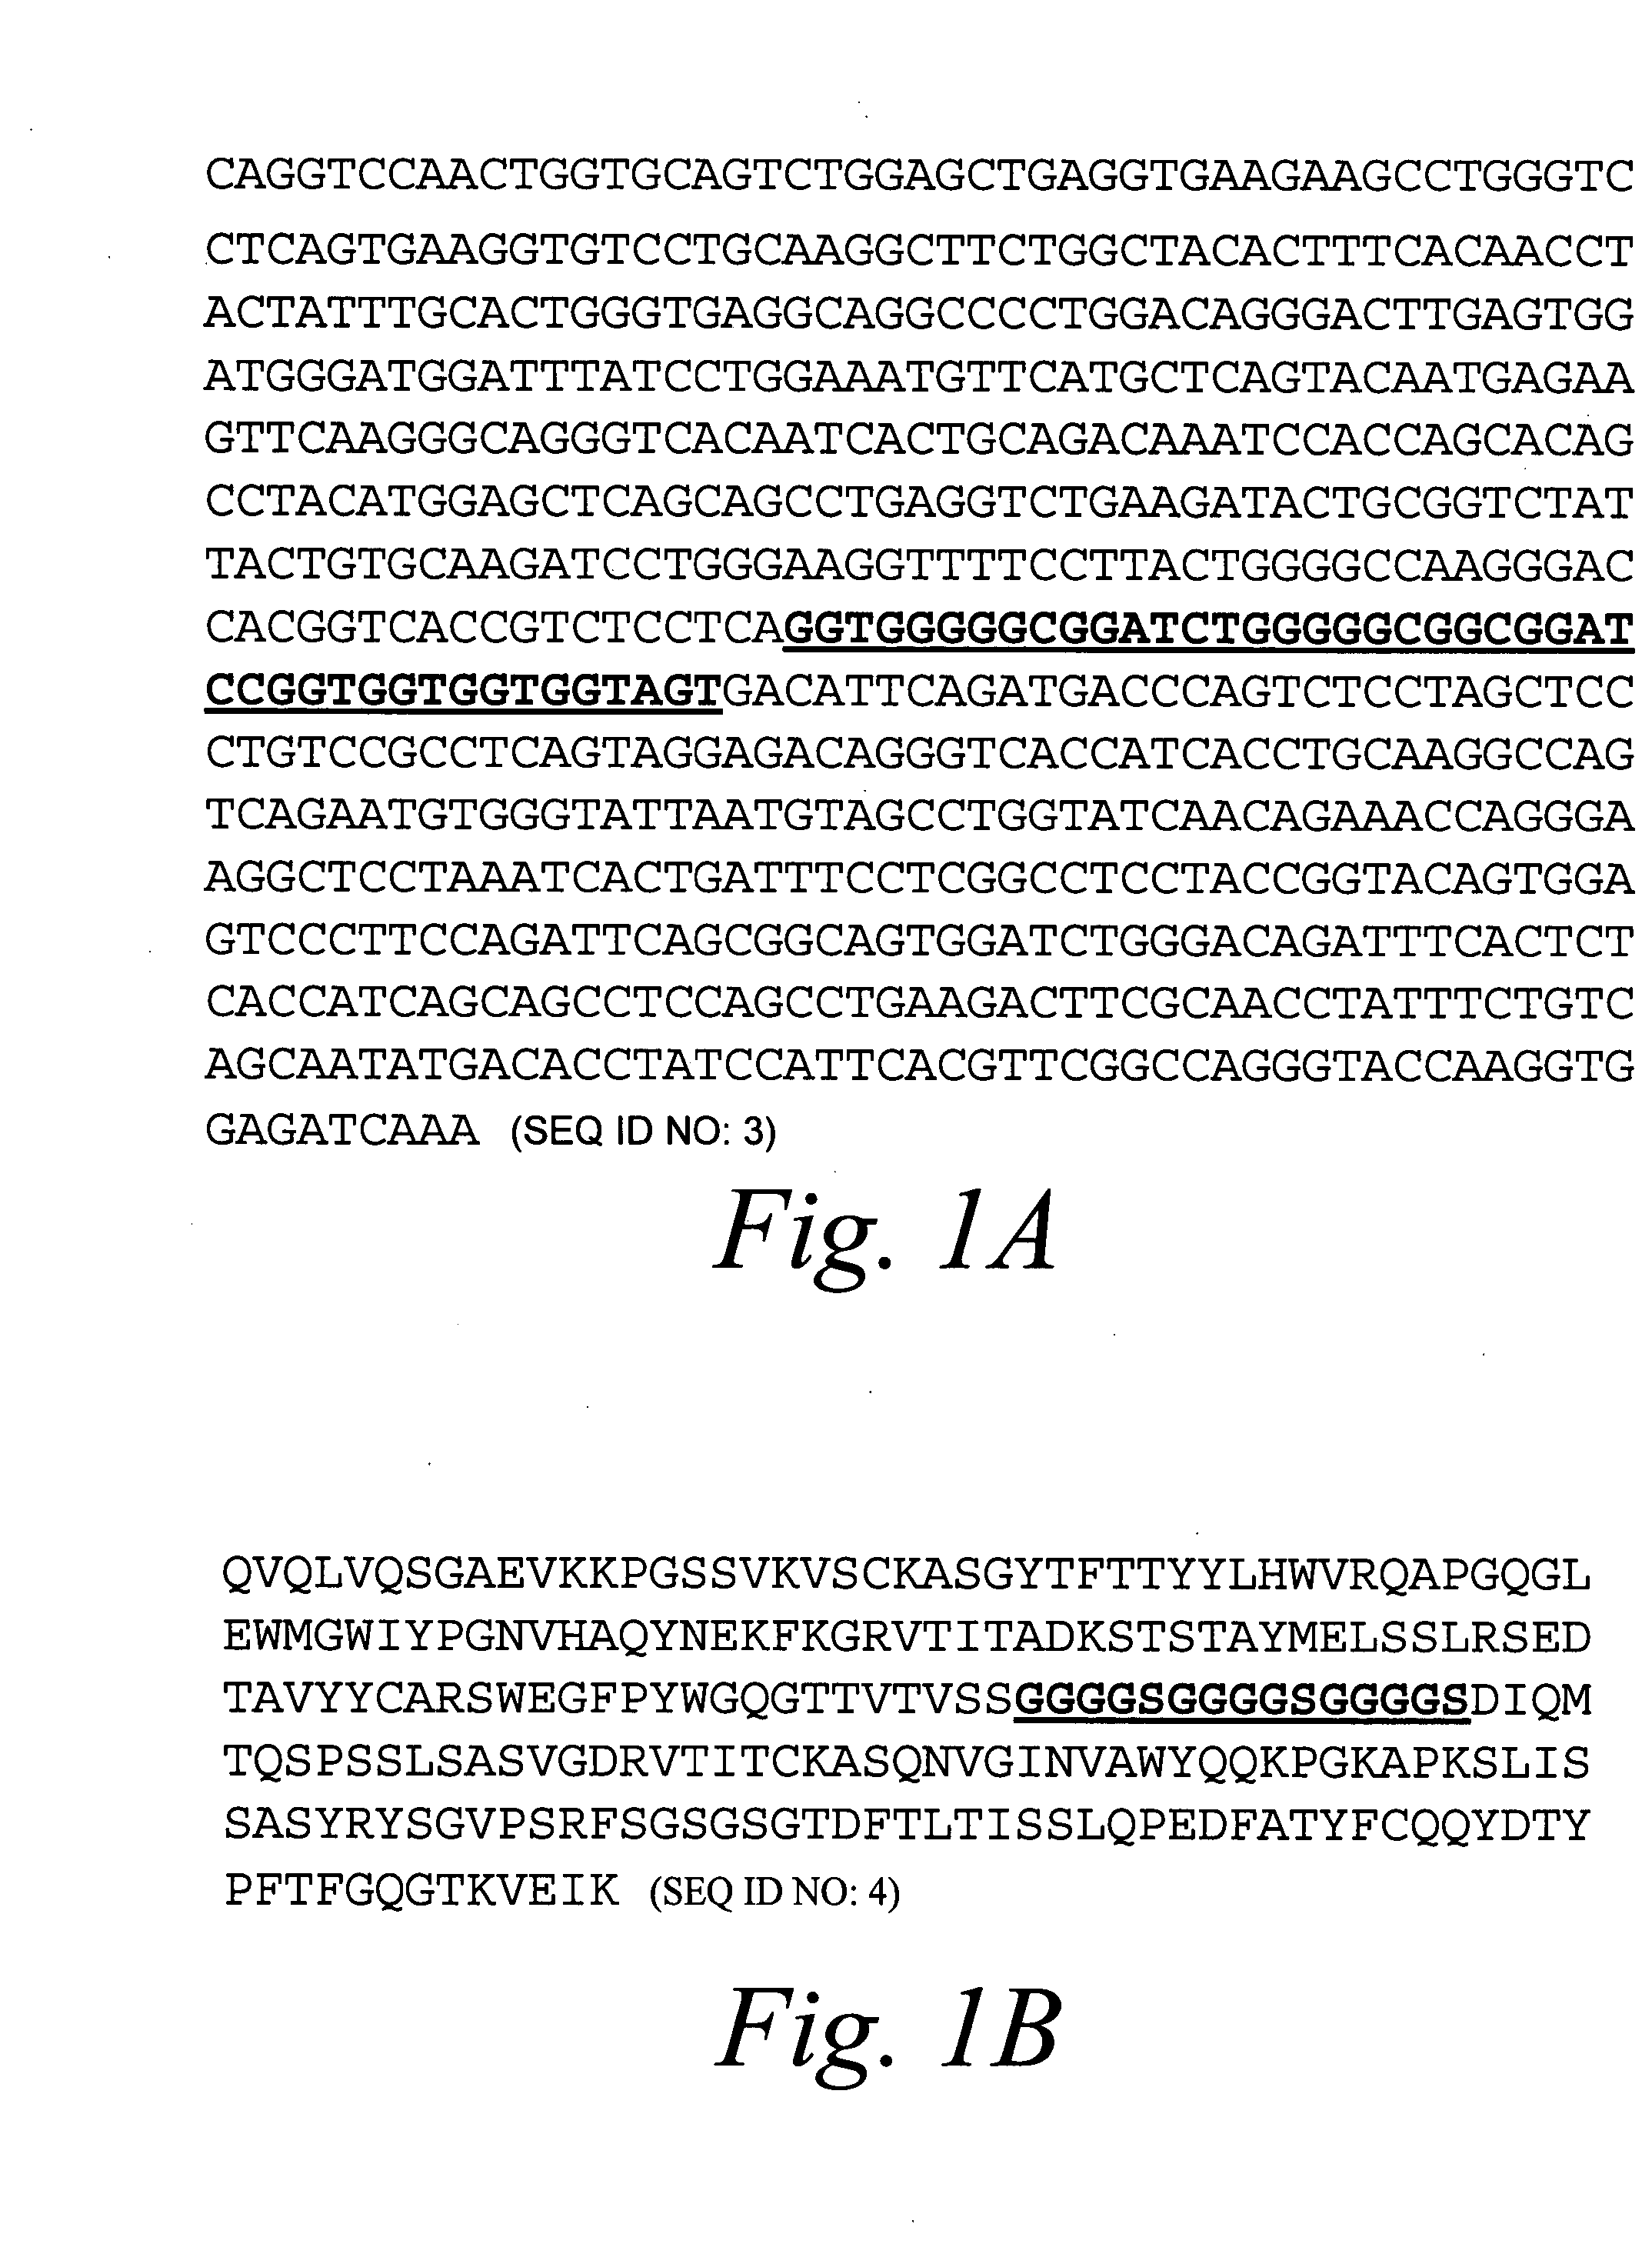 Stabilized polypeptide compositions